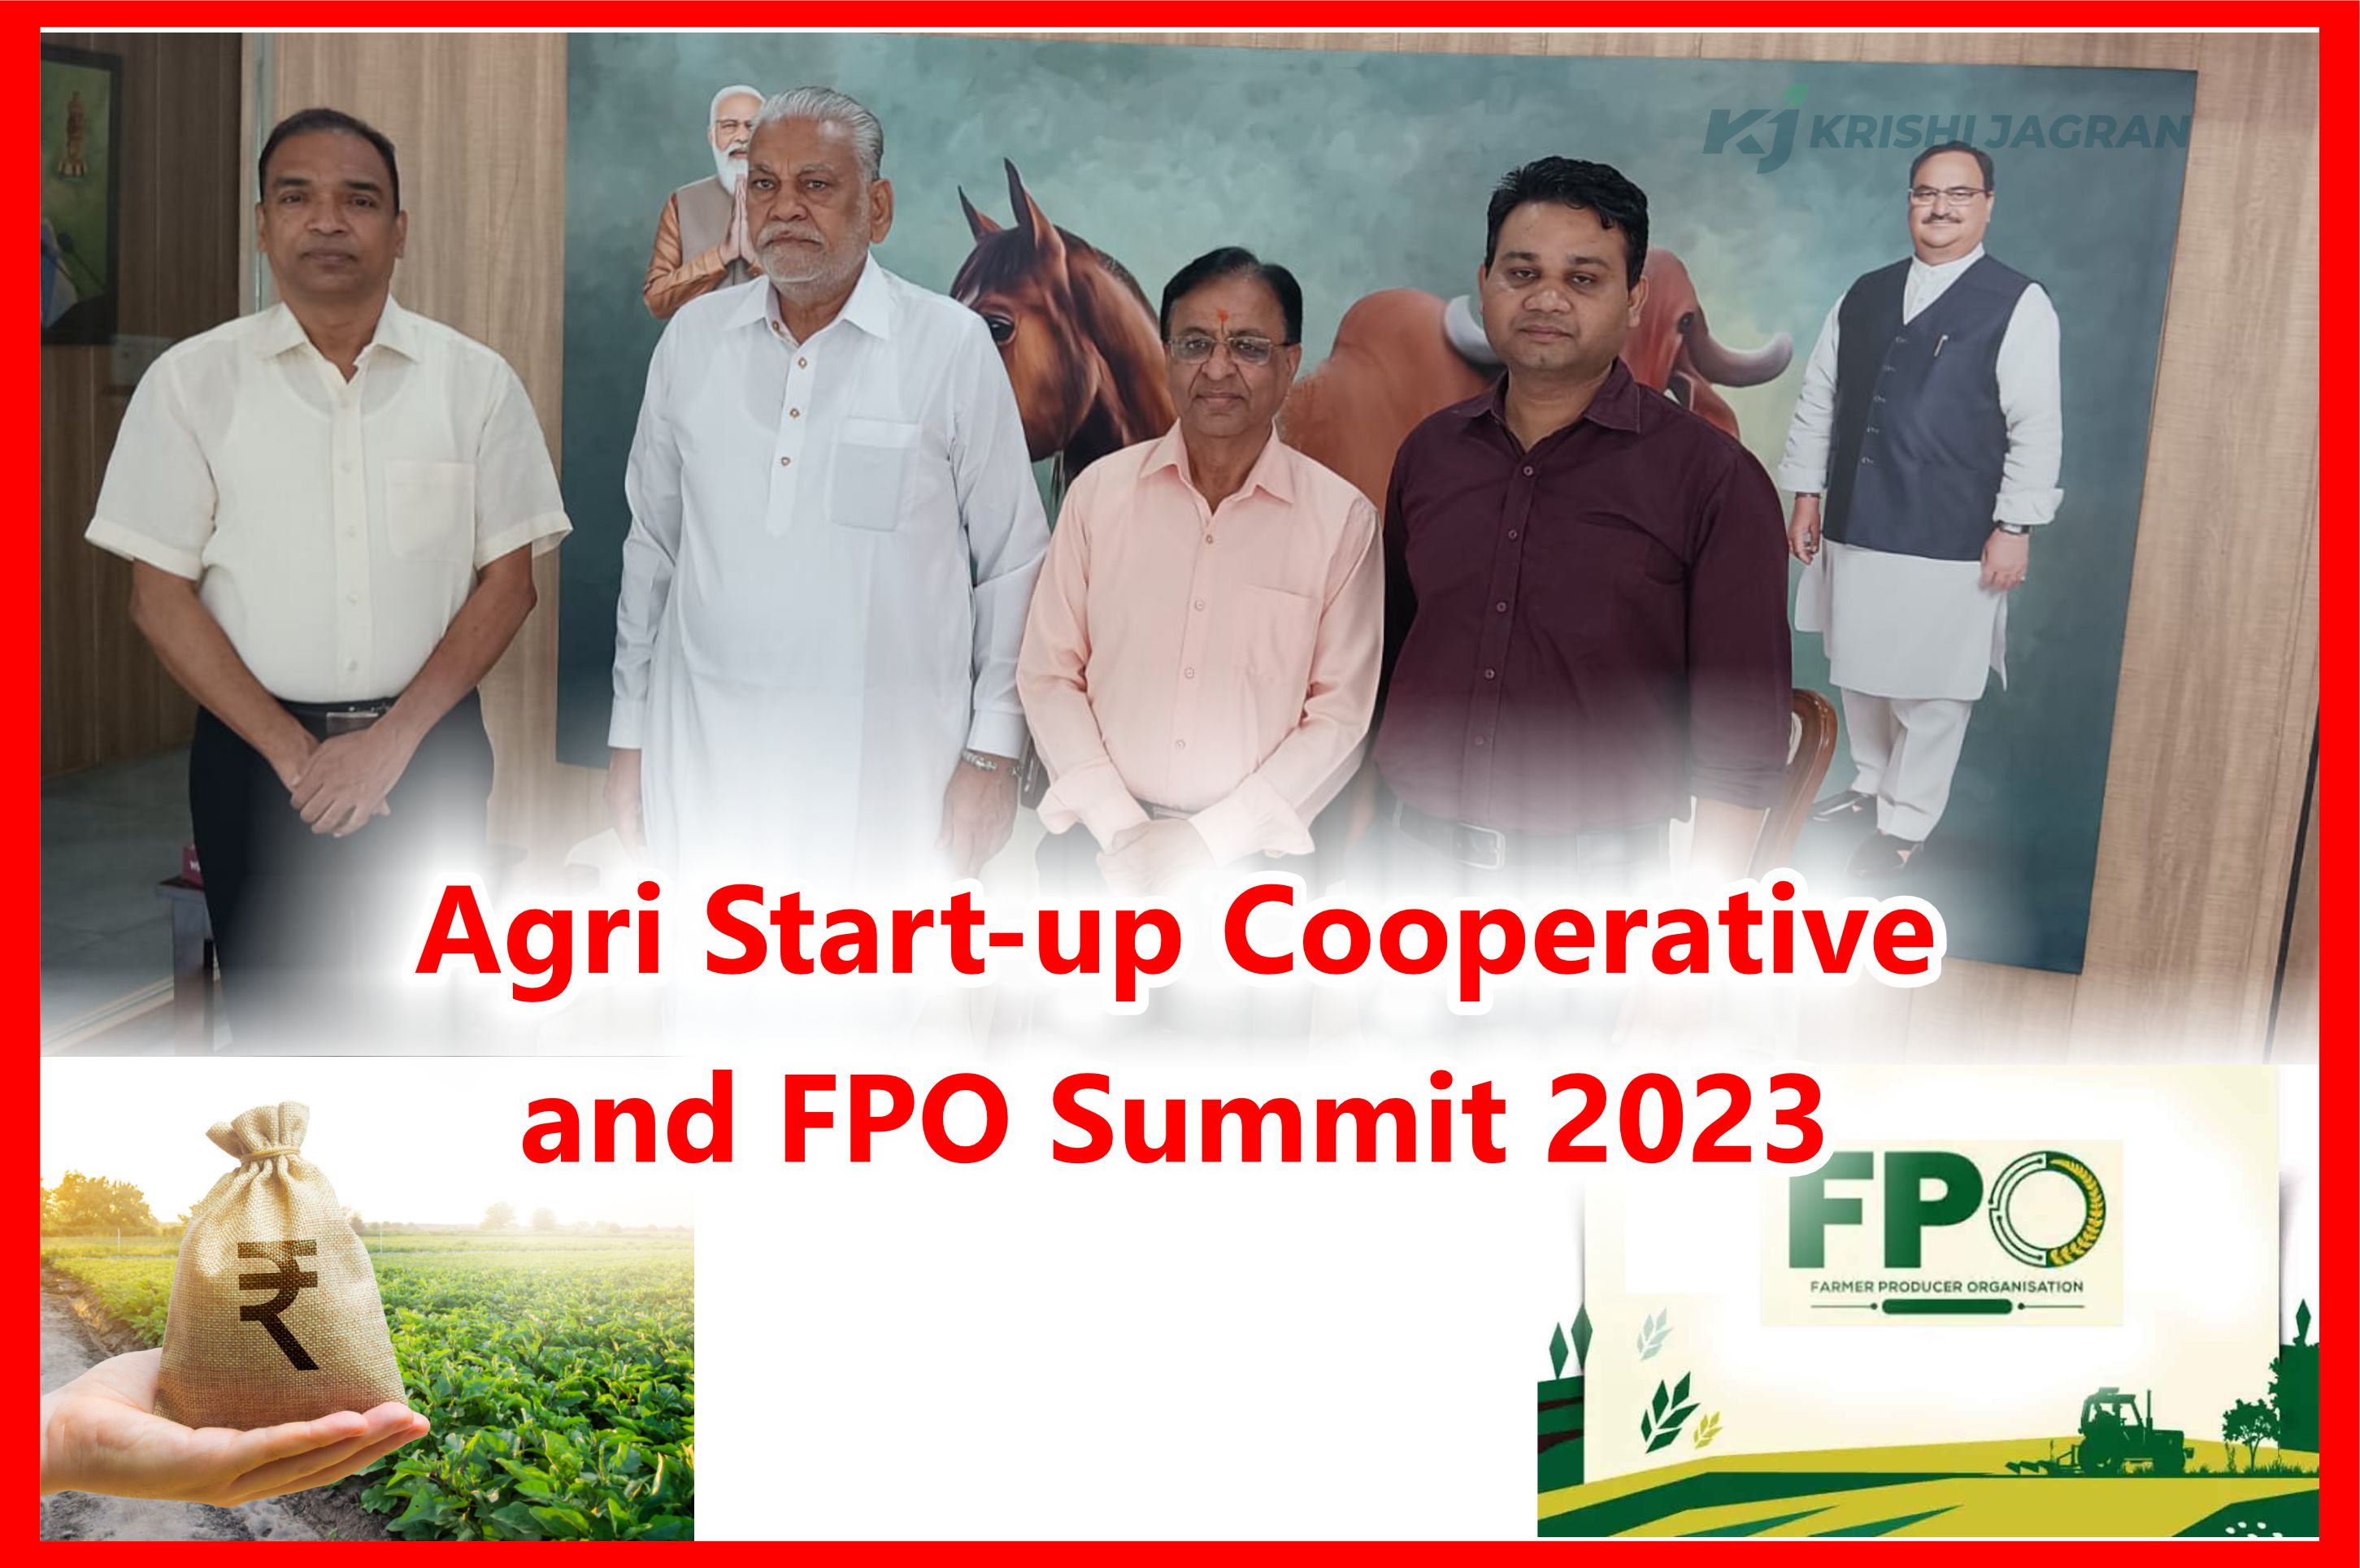 Agri Start-up Cooperative and FPO Summit 2023